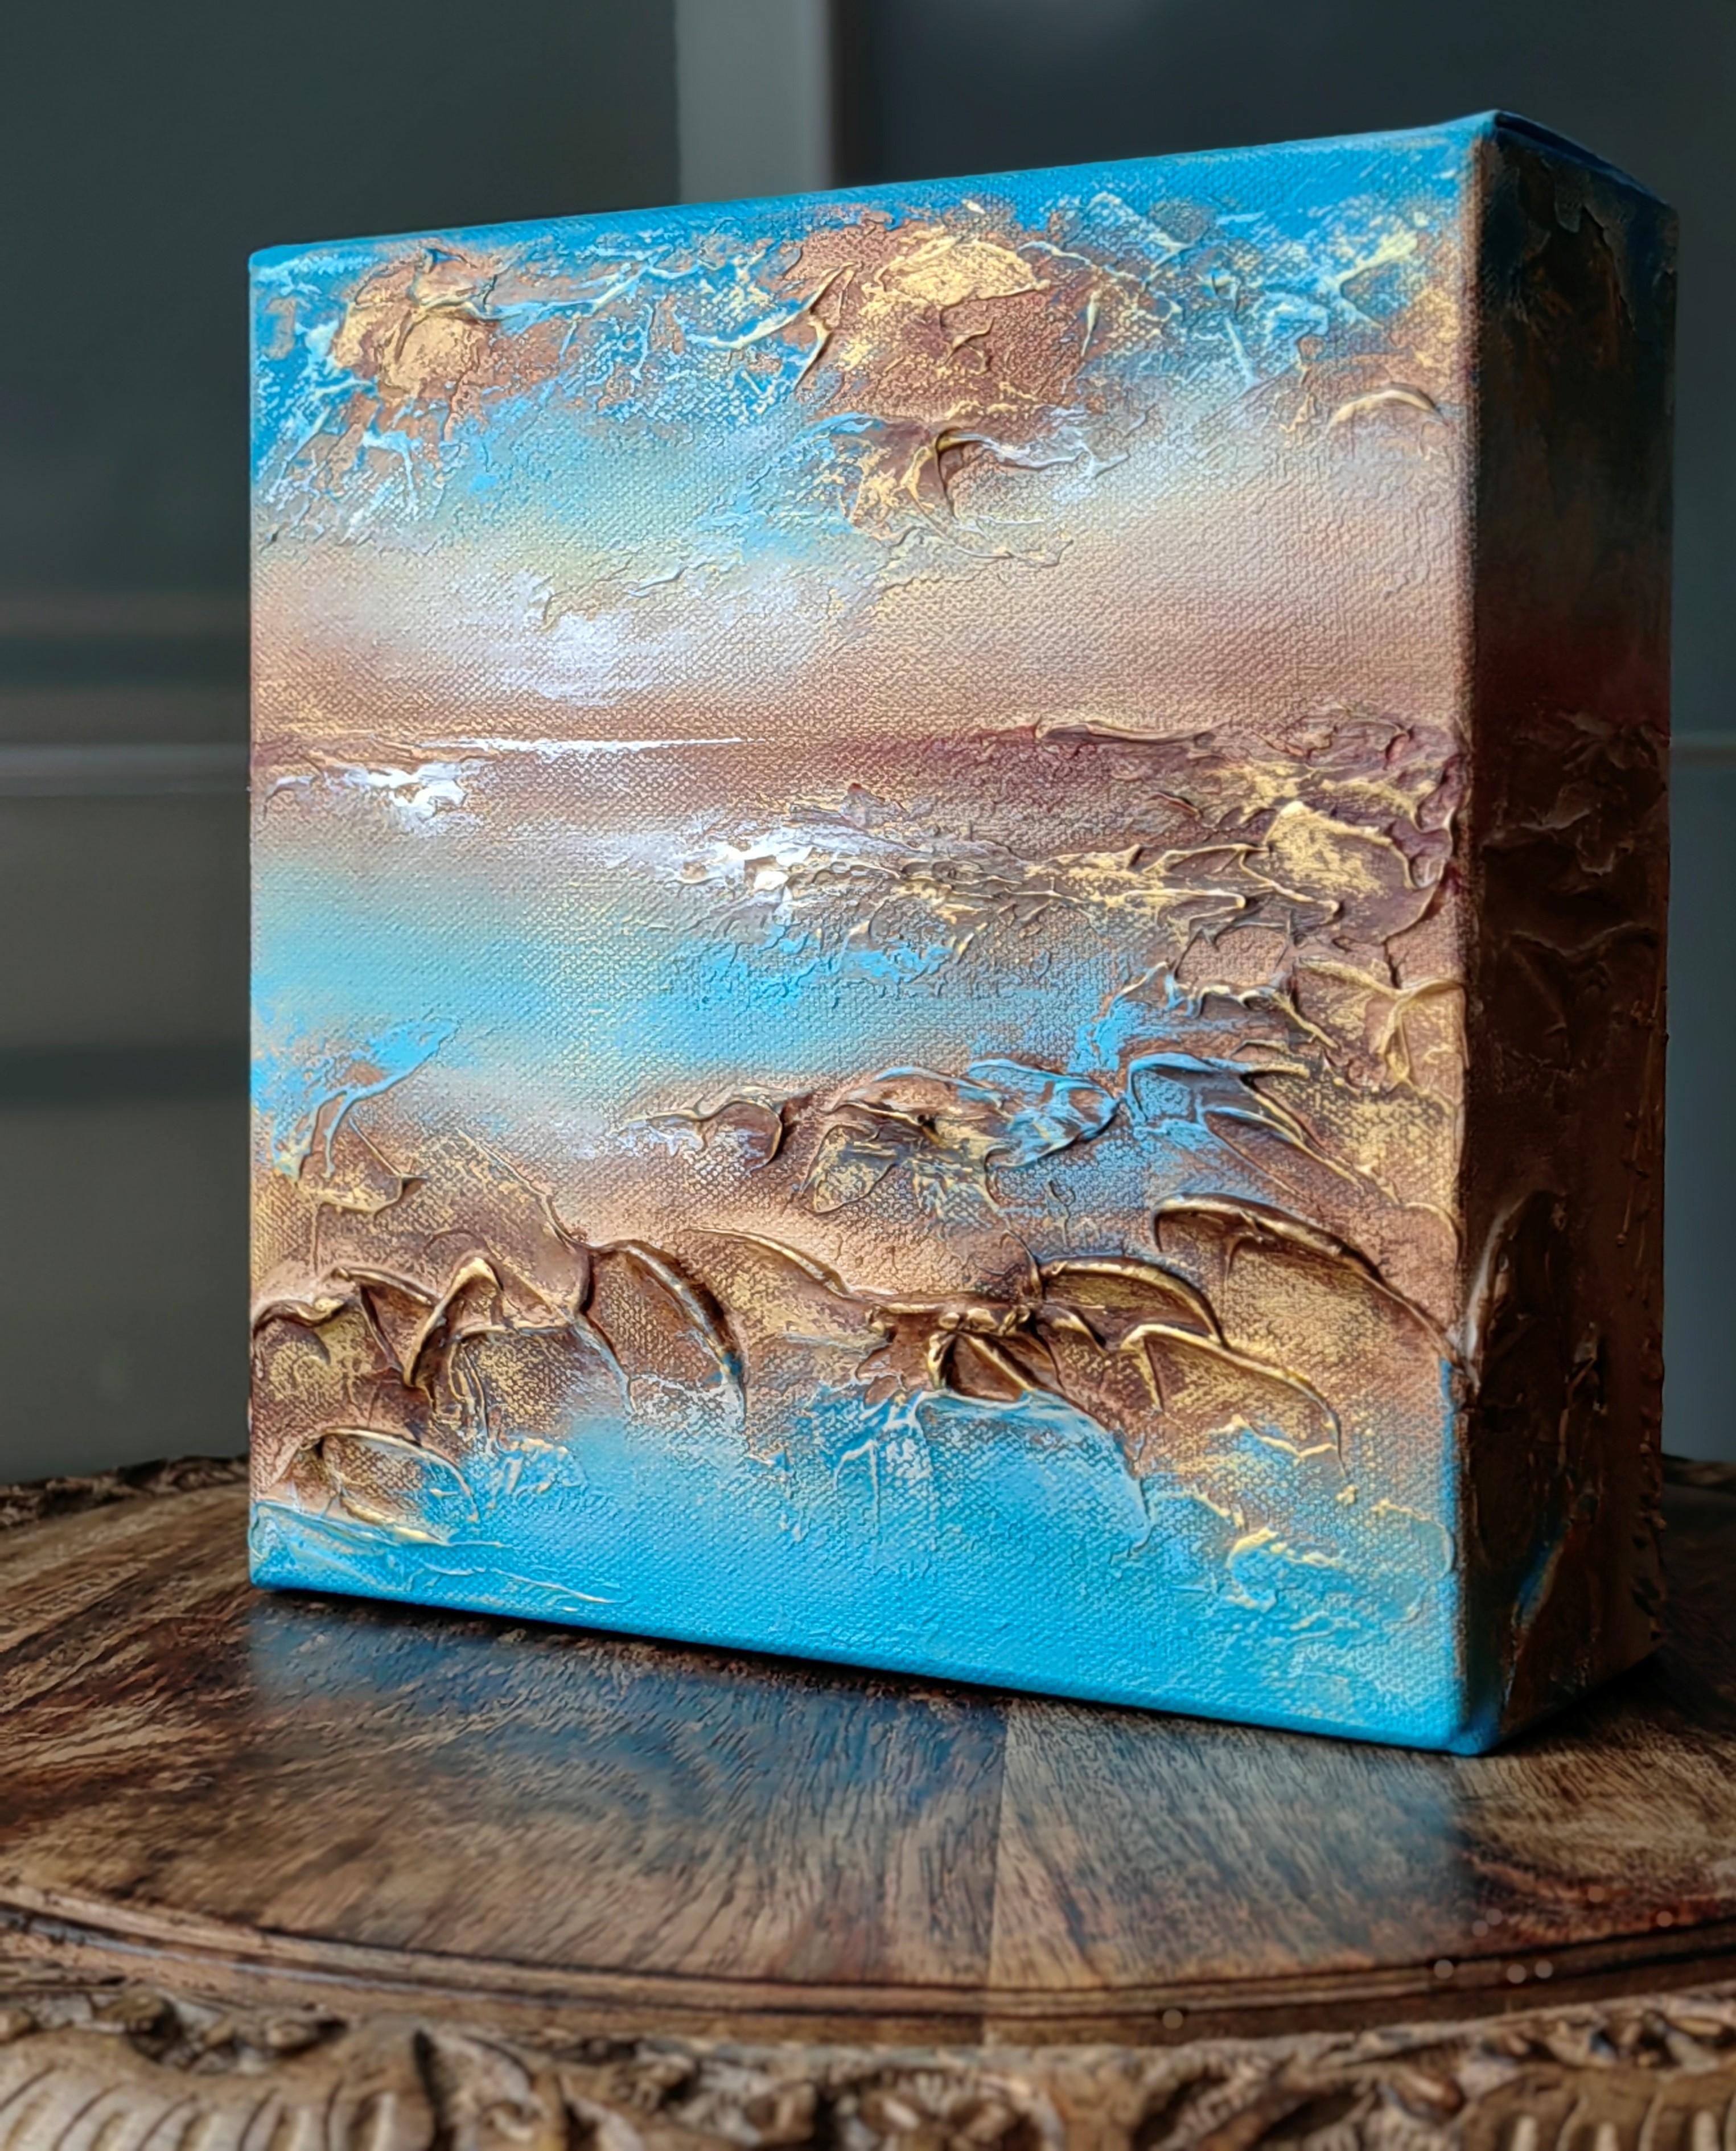 A small semi-abstract beautiful structured mixed media painting with extra deep (7cm) painted edges. The painting can be hung on a wall or placed on a table. A perfect gift for your loved ones or for yourself.

This painting has a lot of structures